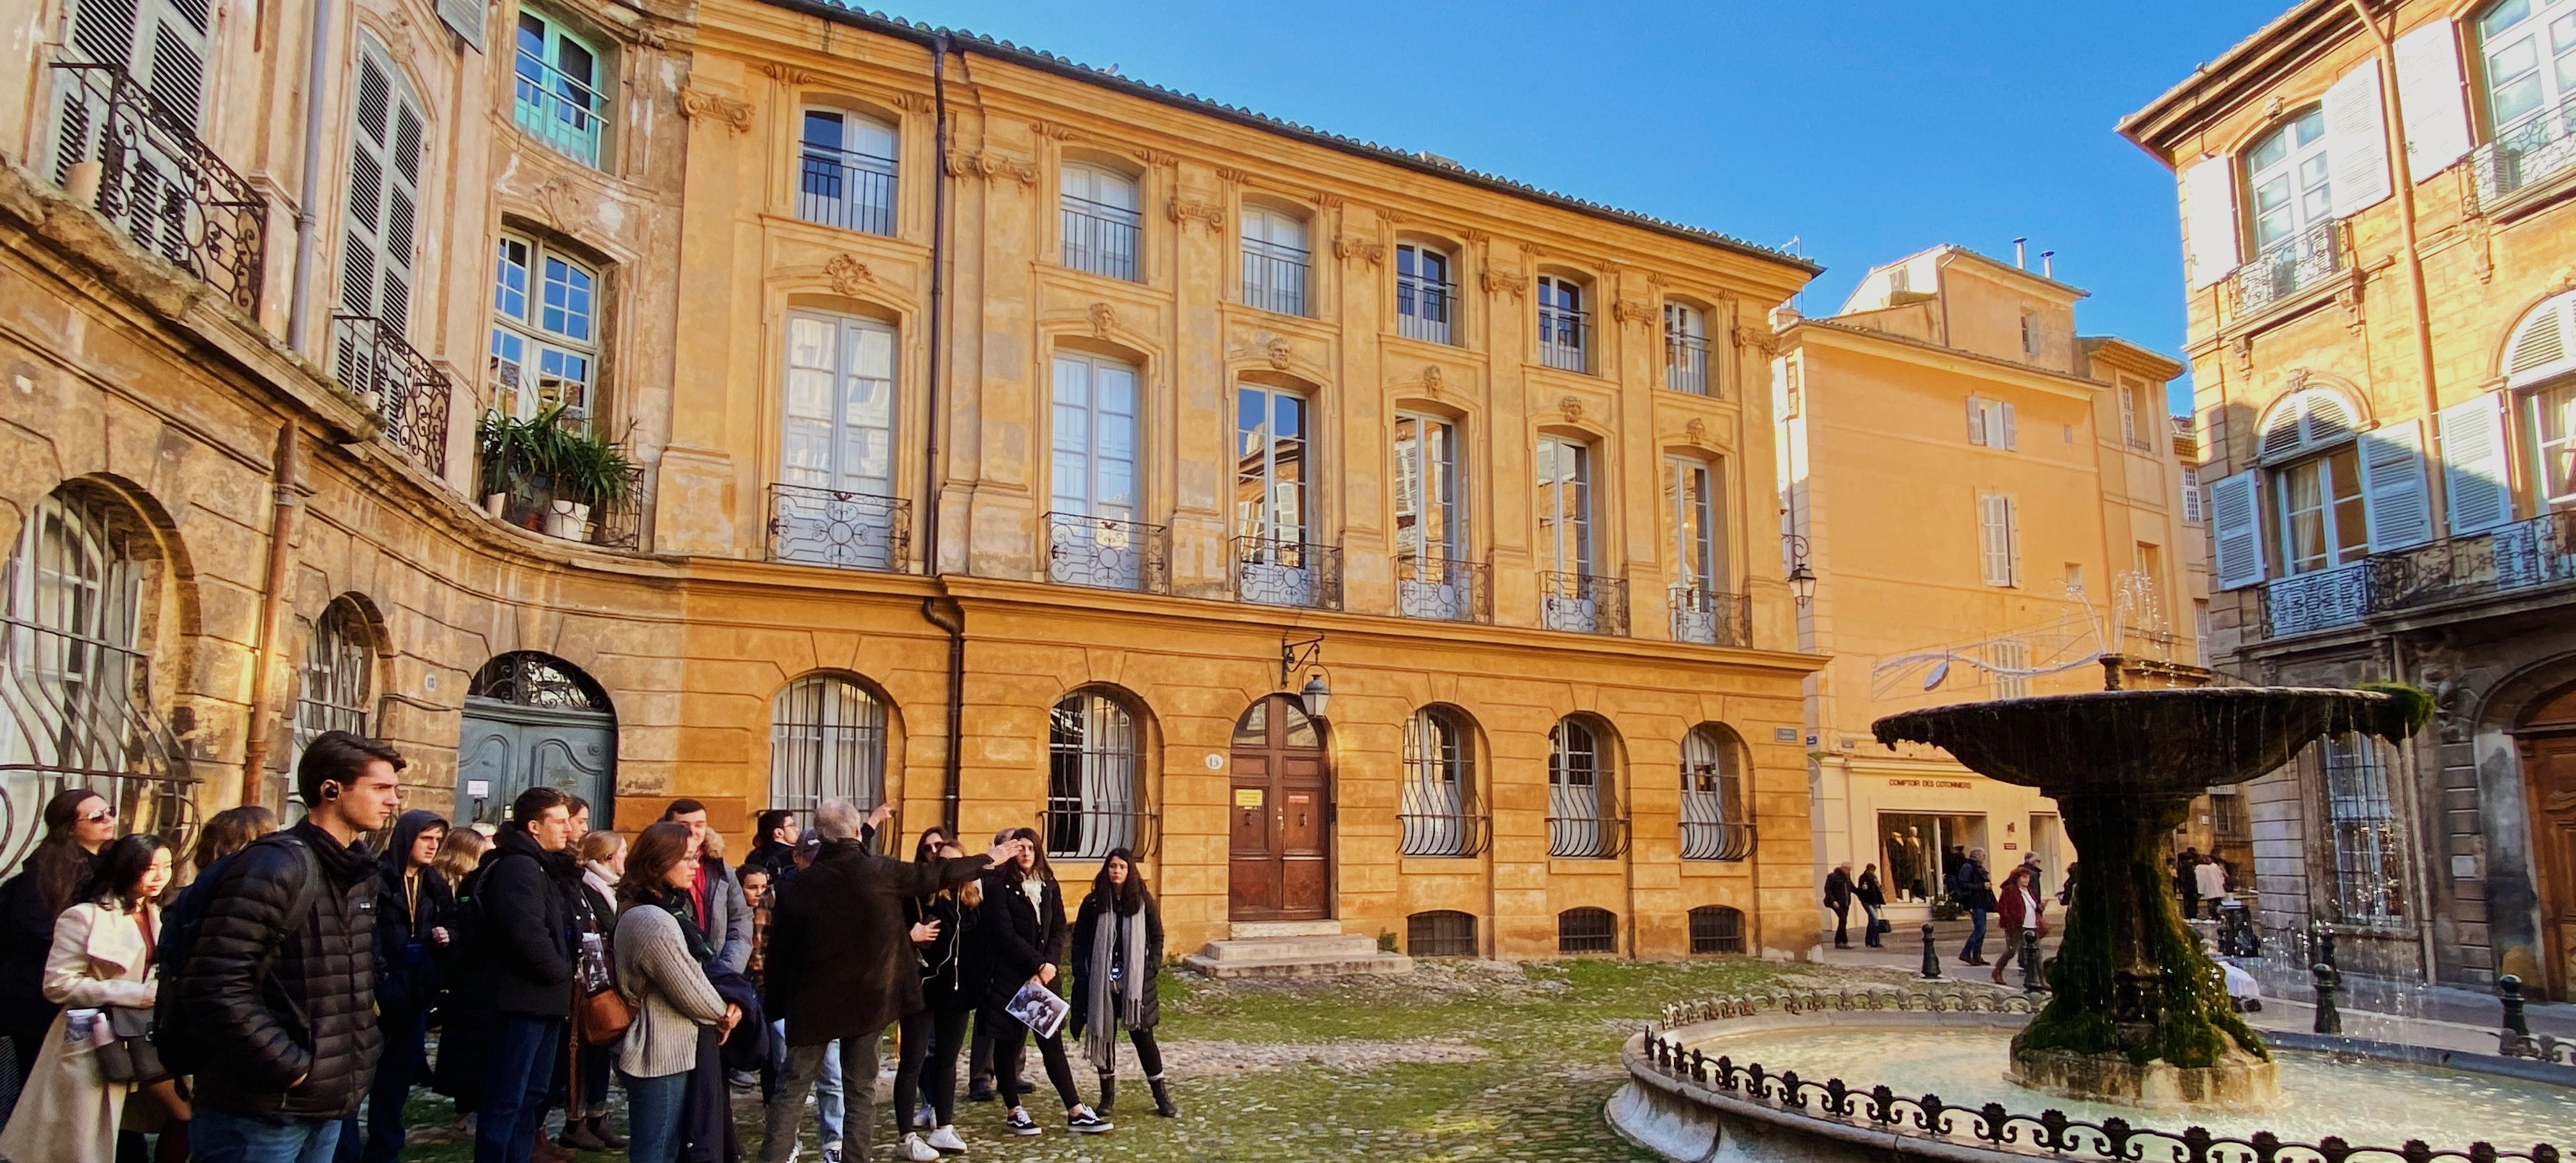 Aix-en-Provence with students studying abroad